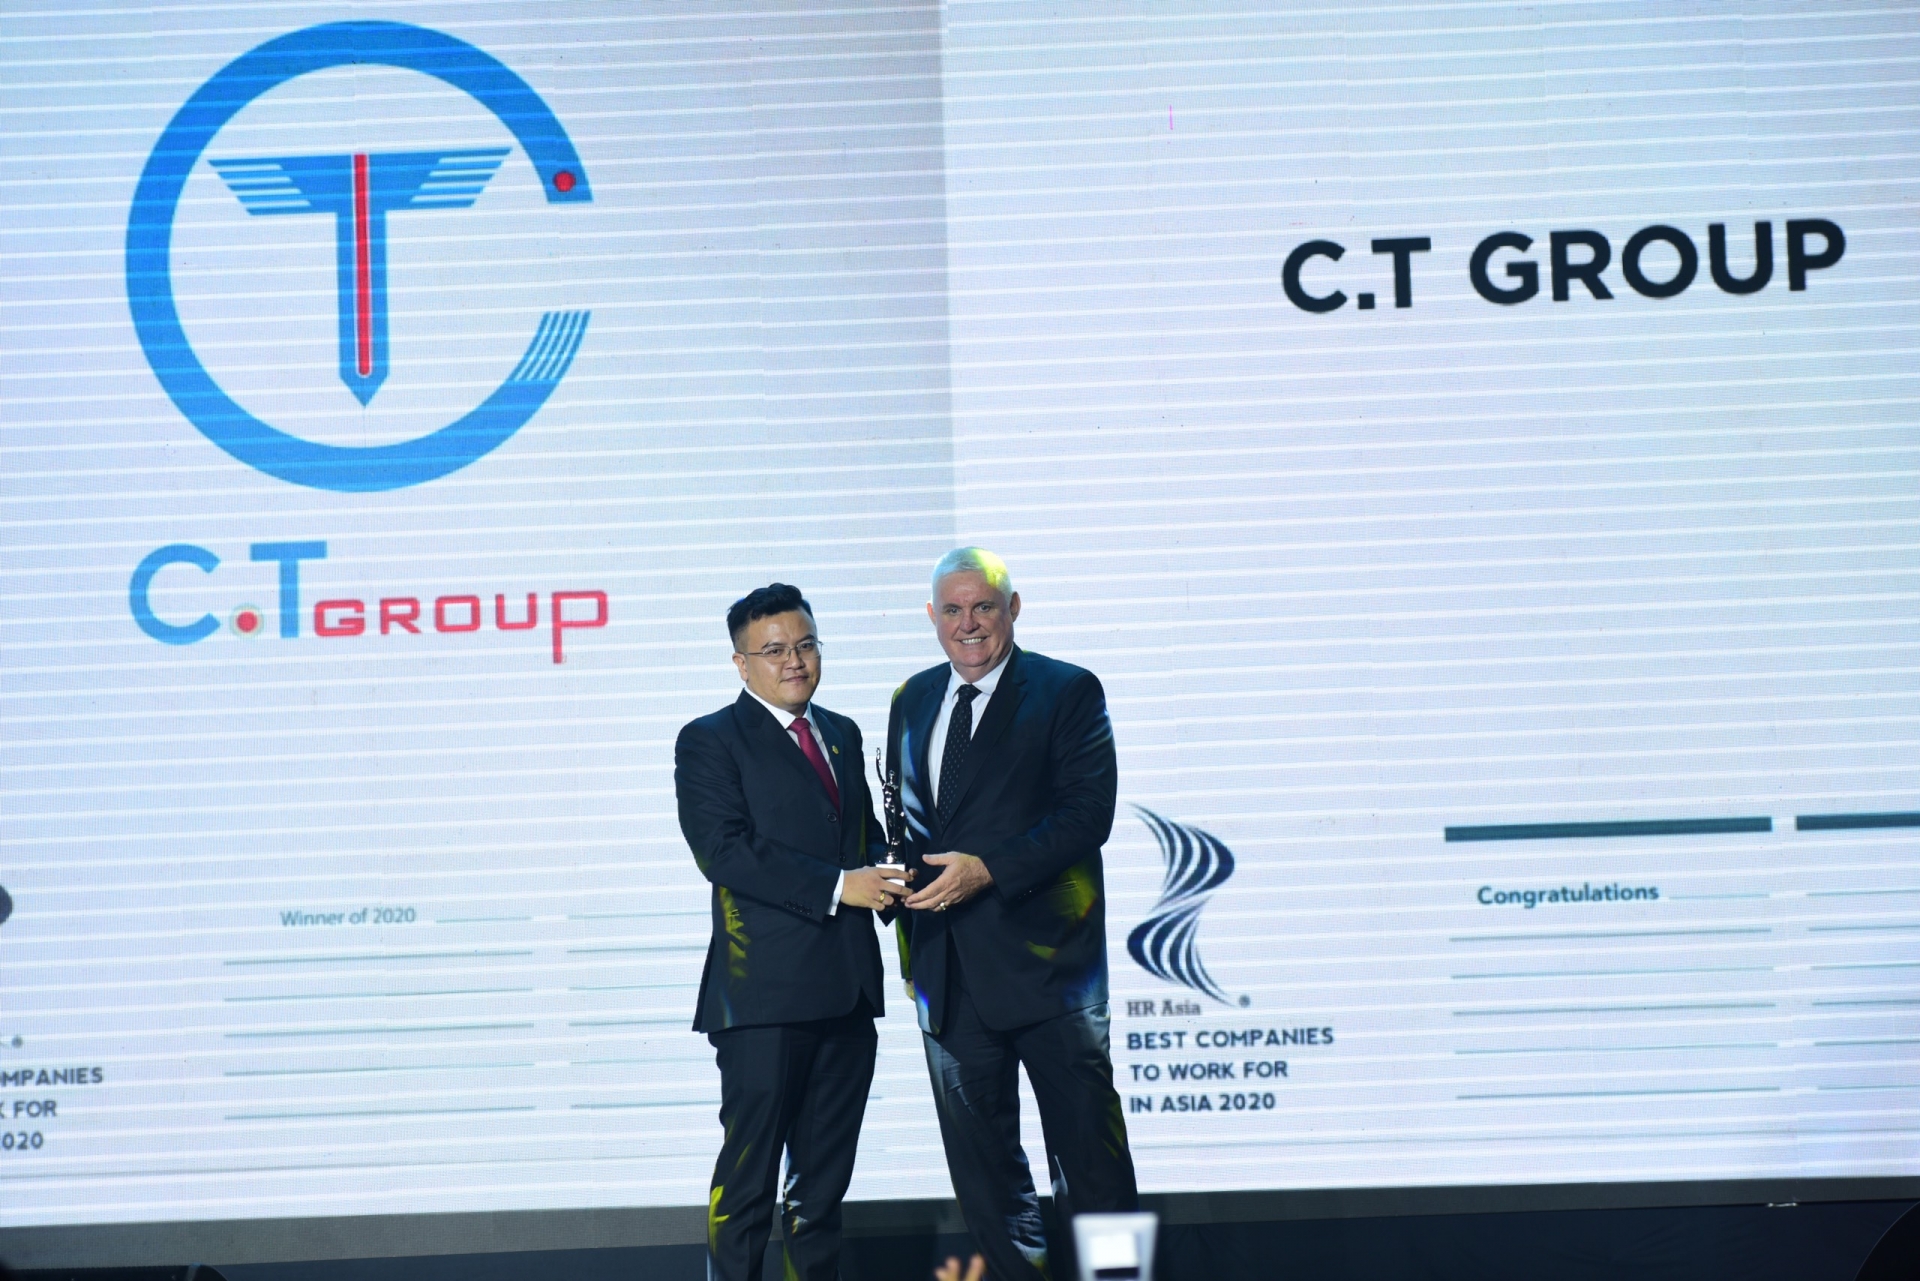 C.T Group receives Best Company to Work for in Asia award